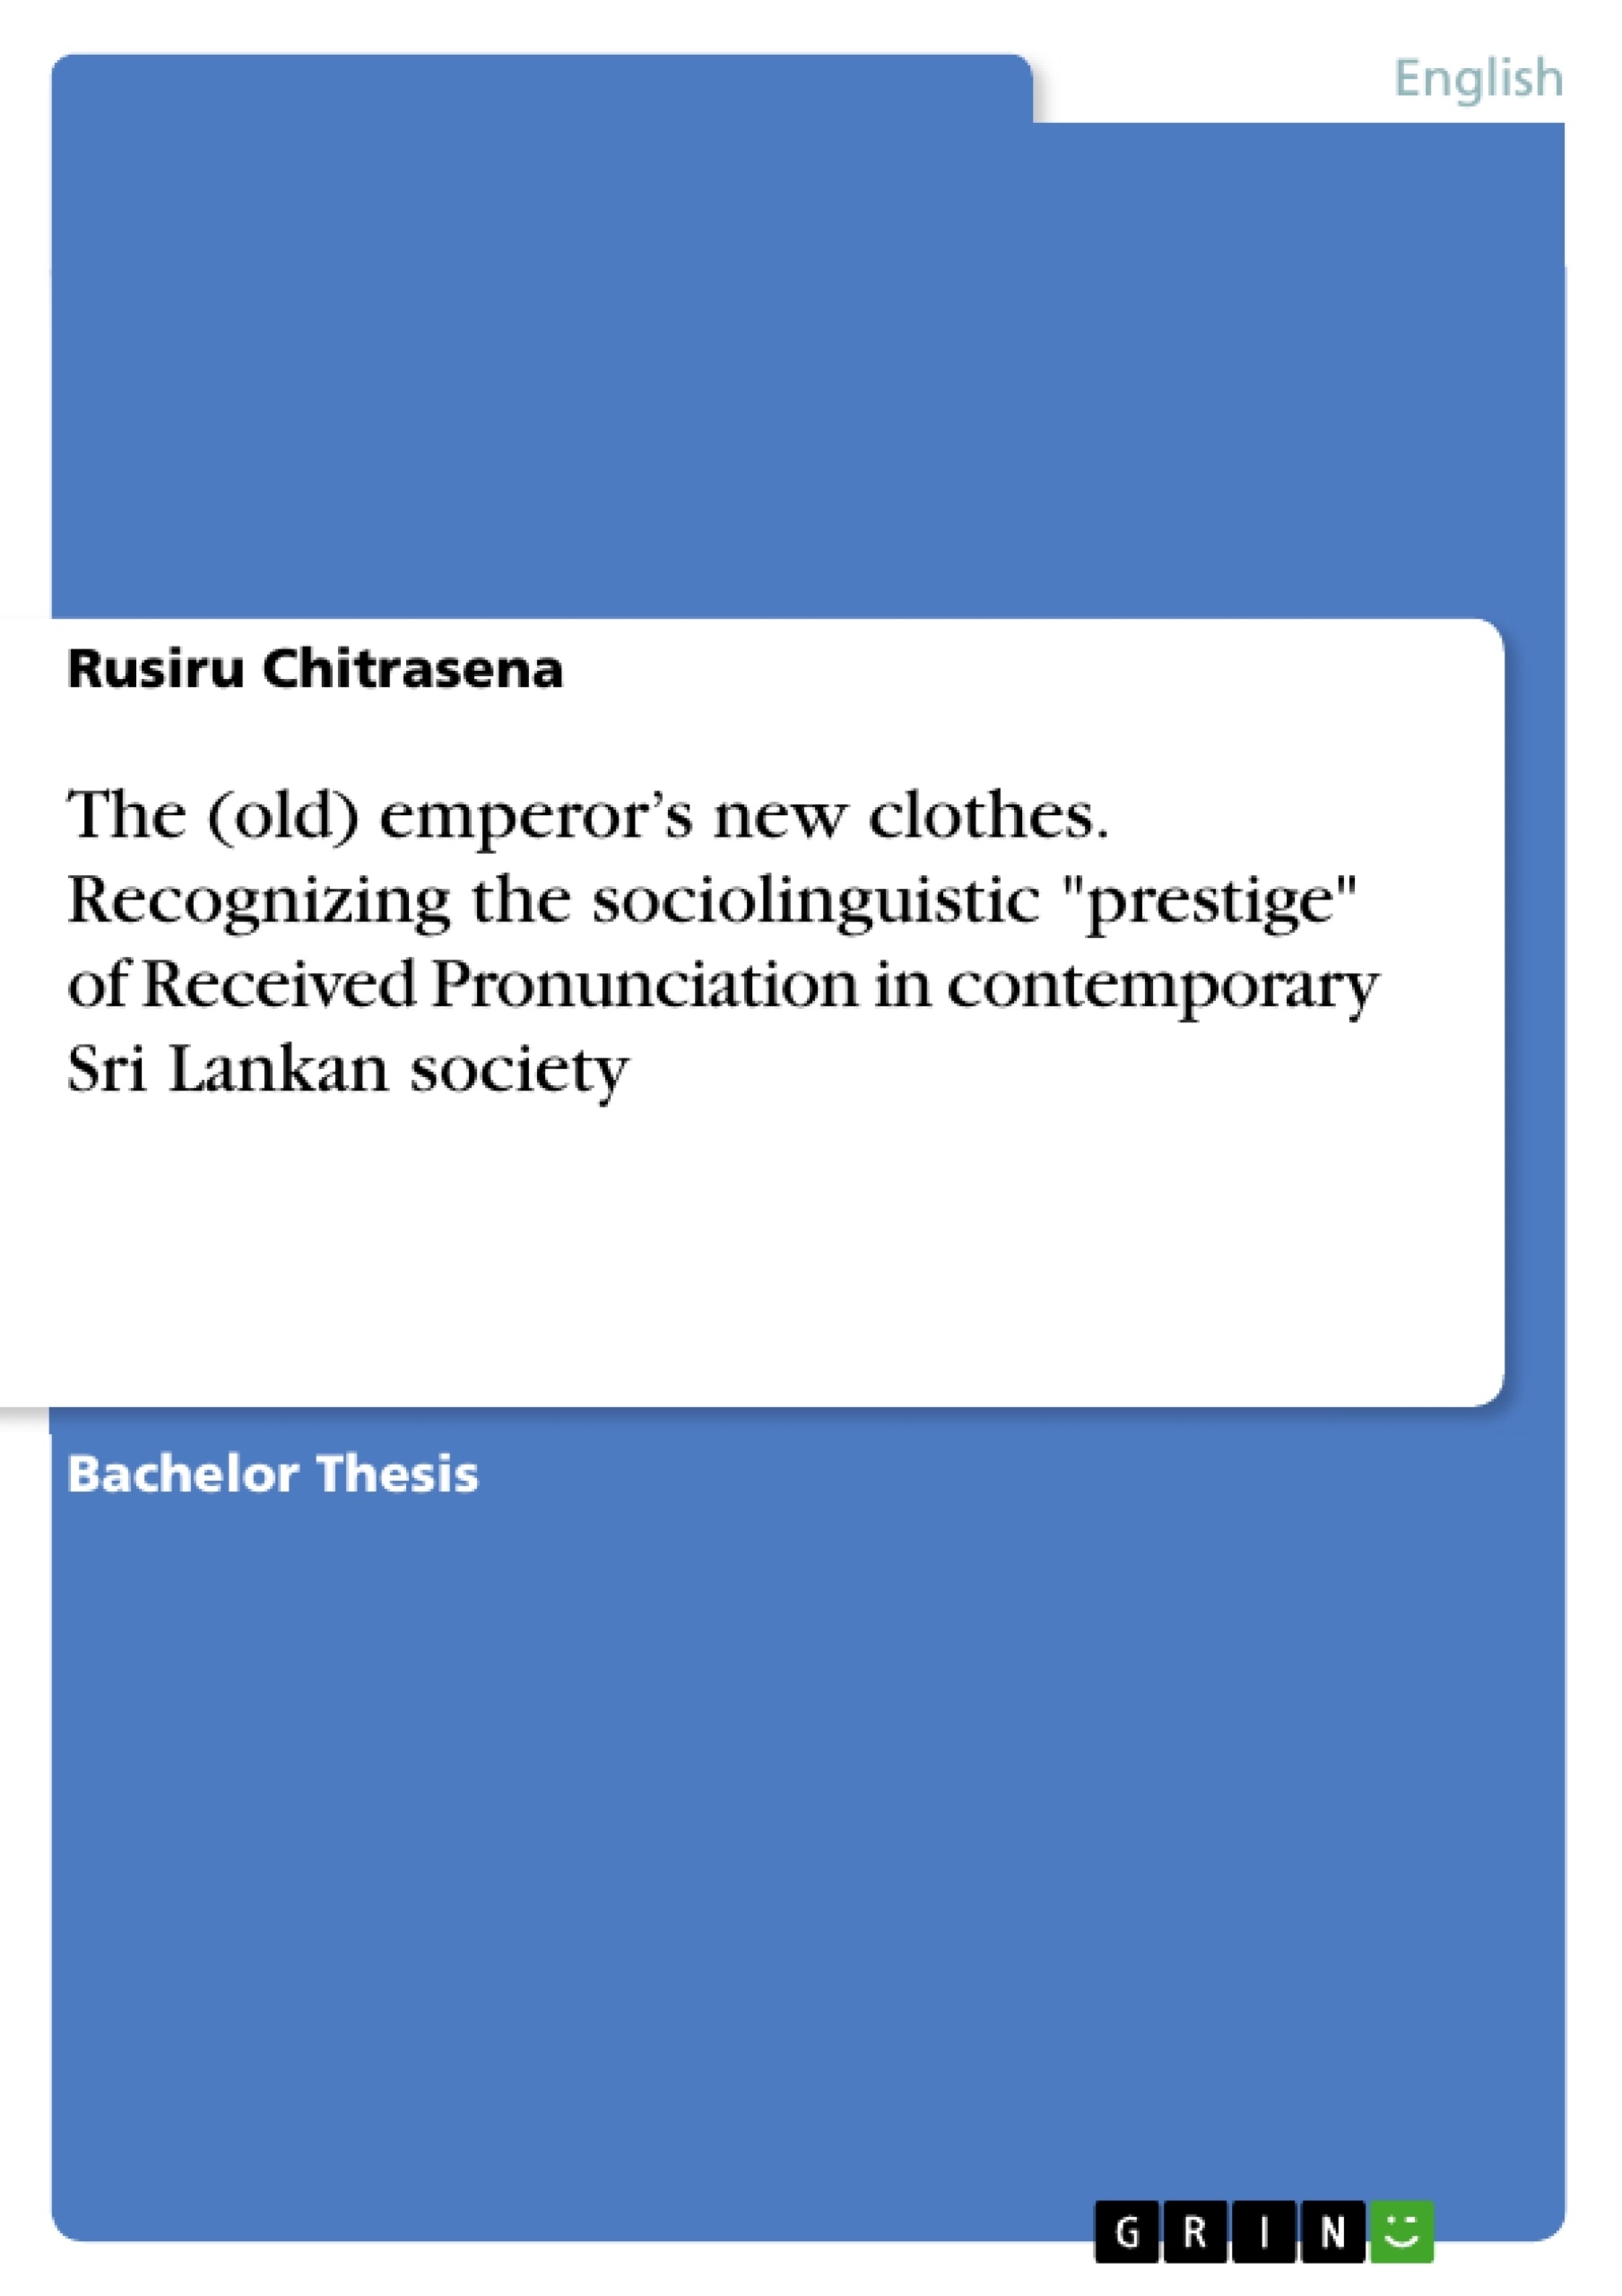 Título: The (old) emperor’s new clothes. Recognizing the sociolinguistic "prestige" of Received Pronunciation in contemporary Sri Lankan society